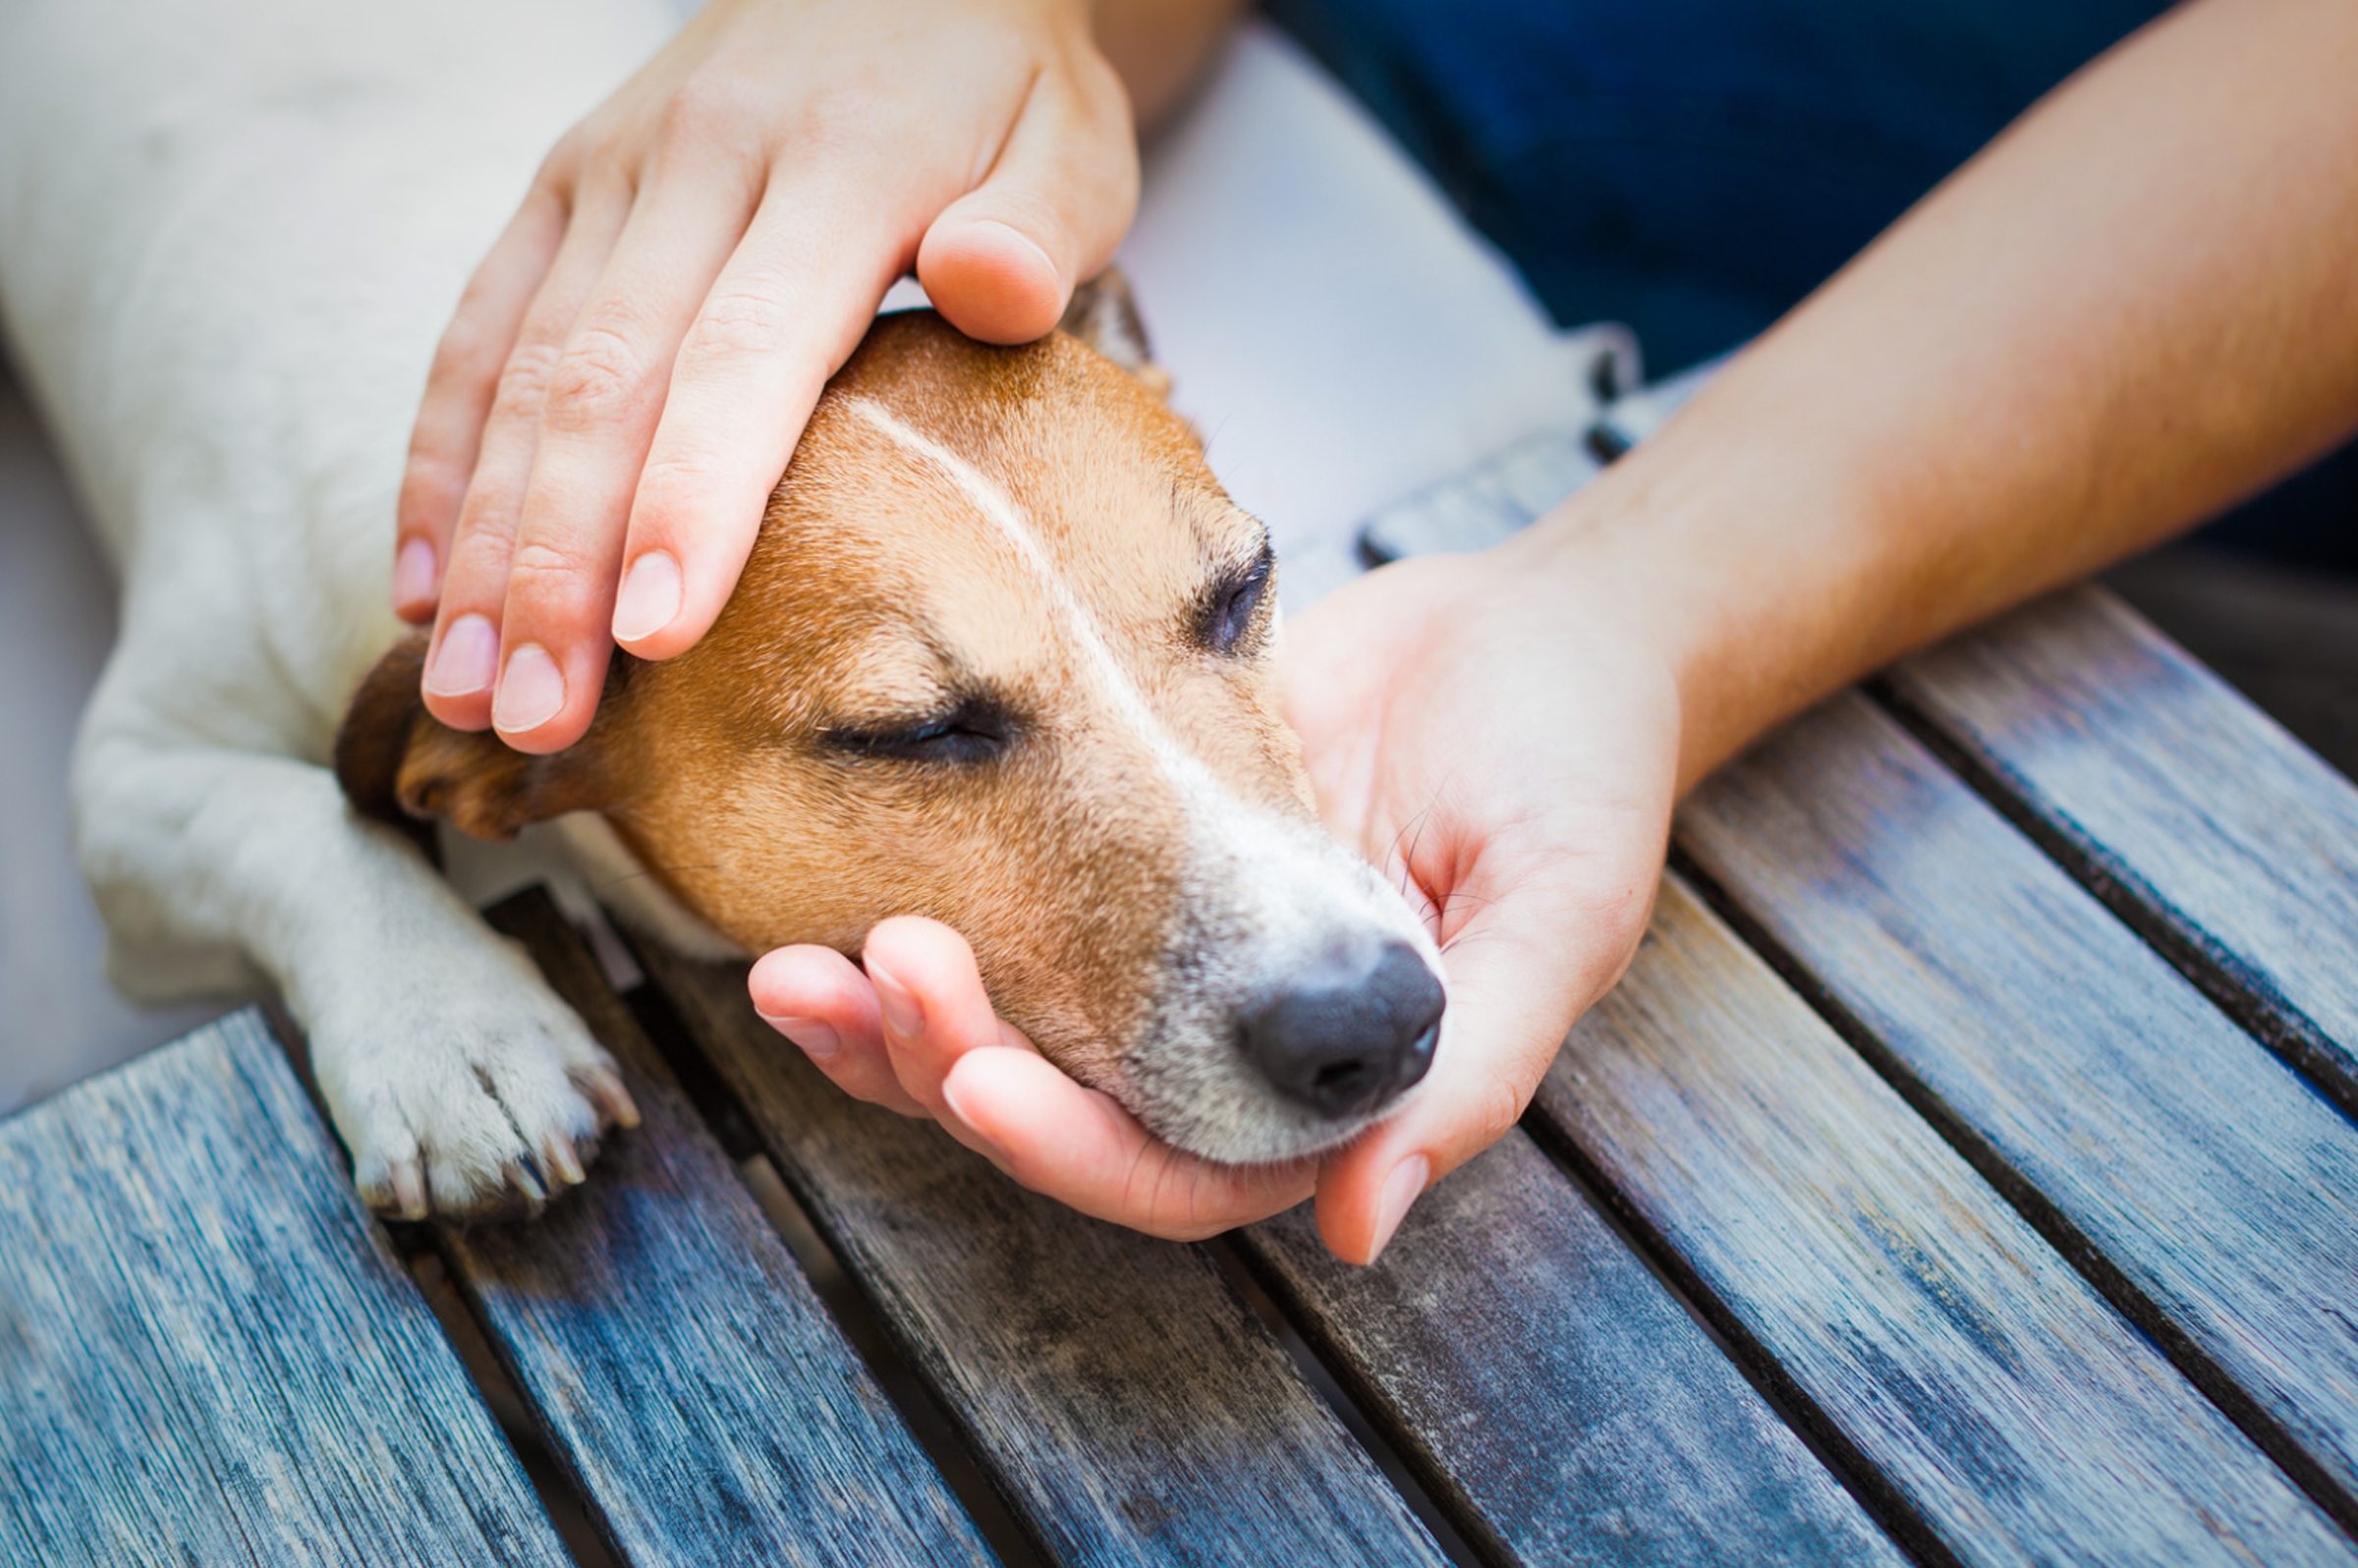 Is Your Dog in Pain? It Could Be Arthritis